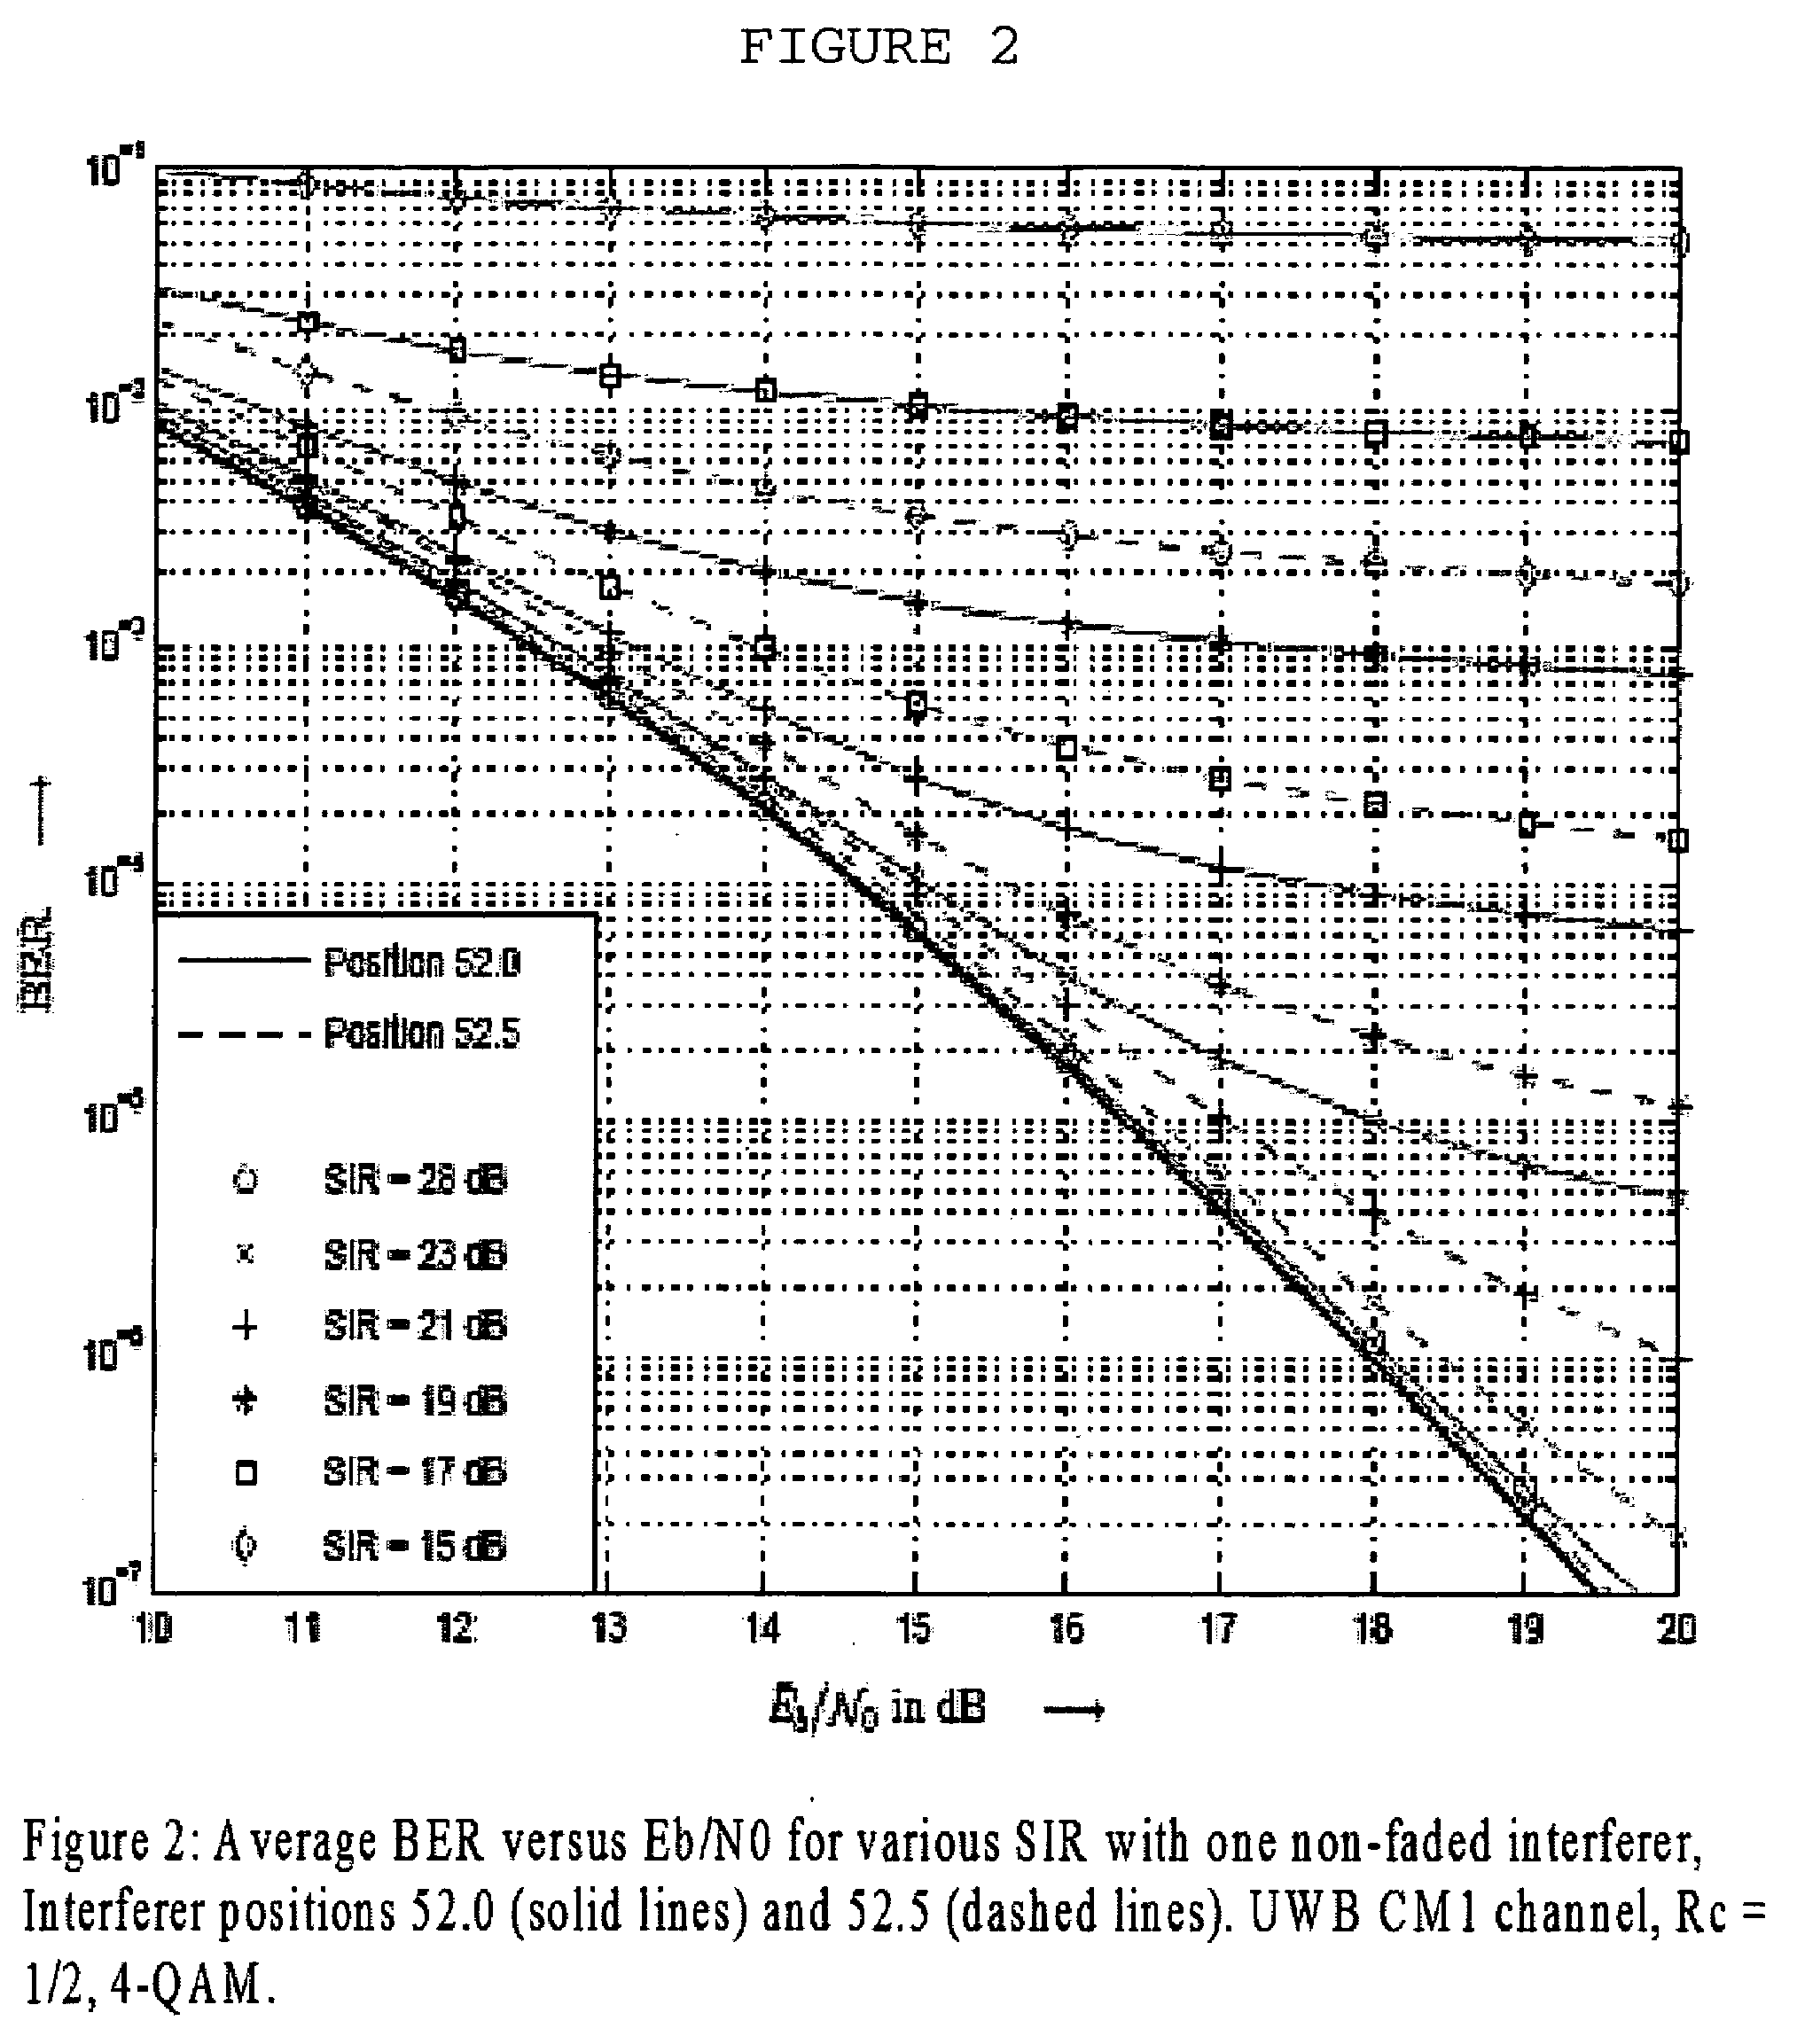 Method of detecting and avoiding interference among wireless network by dynamically estimating the noise level from the UWB PER and BER, and synchronously switching into unoccupied channel